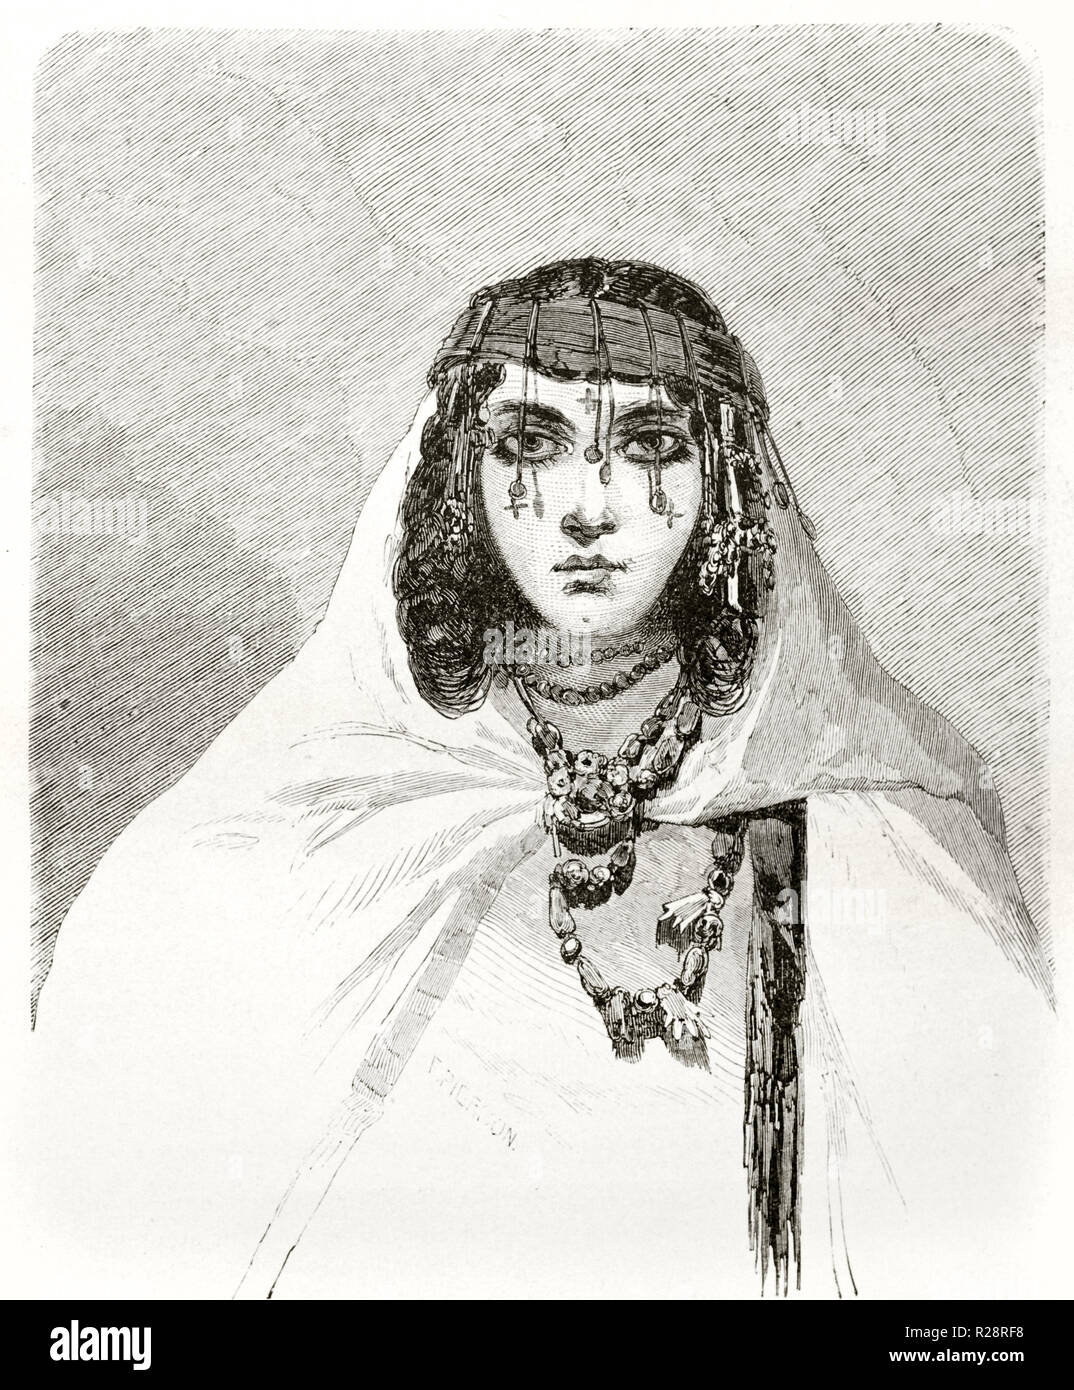 Old engraved portrait of a woman in Metlili, Algeria. By Couverchel ...